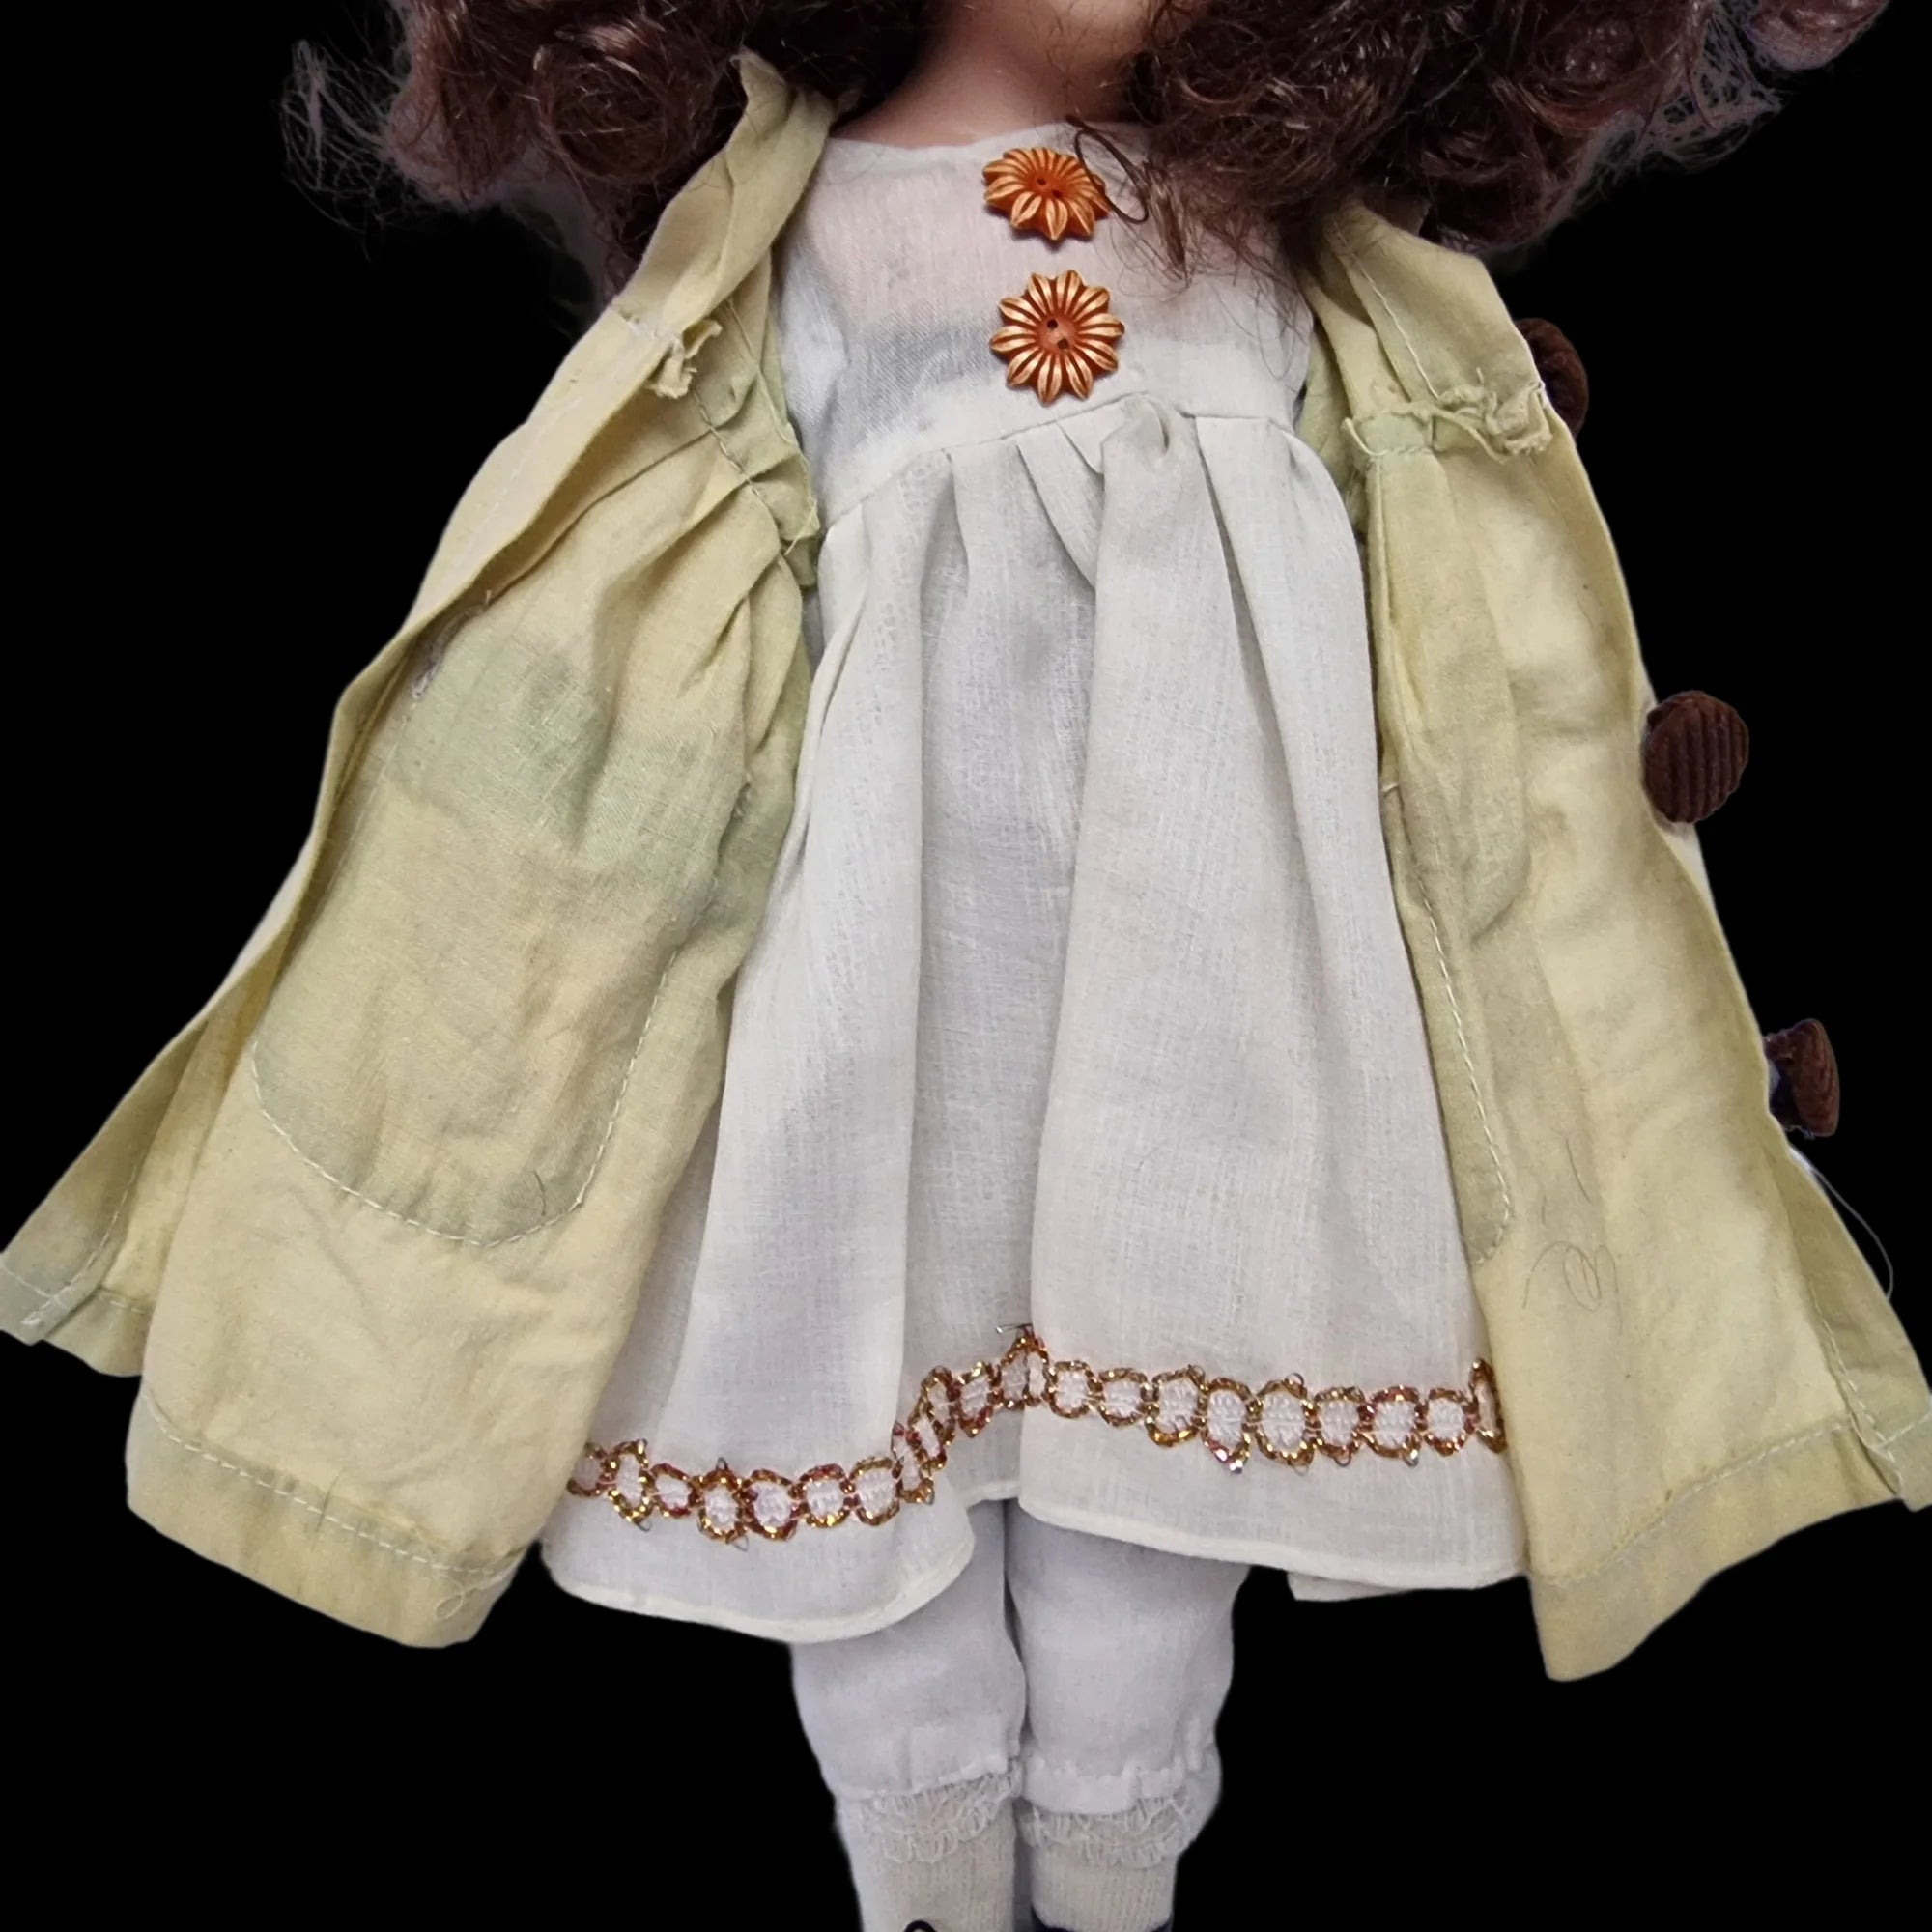 Porcelain Doll Female White Dress And Coat Removeable